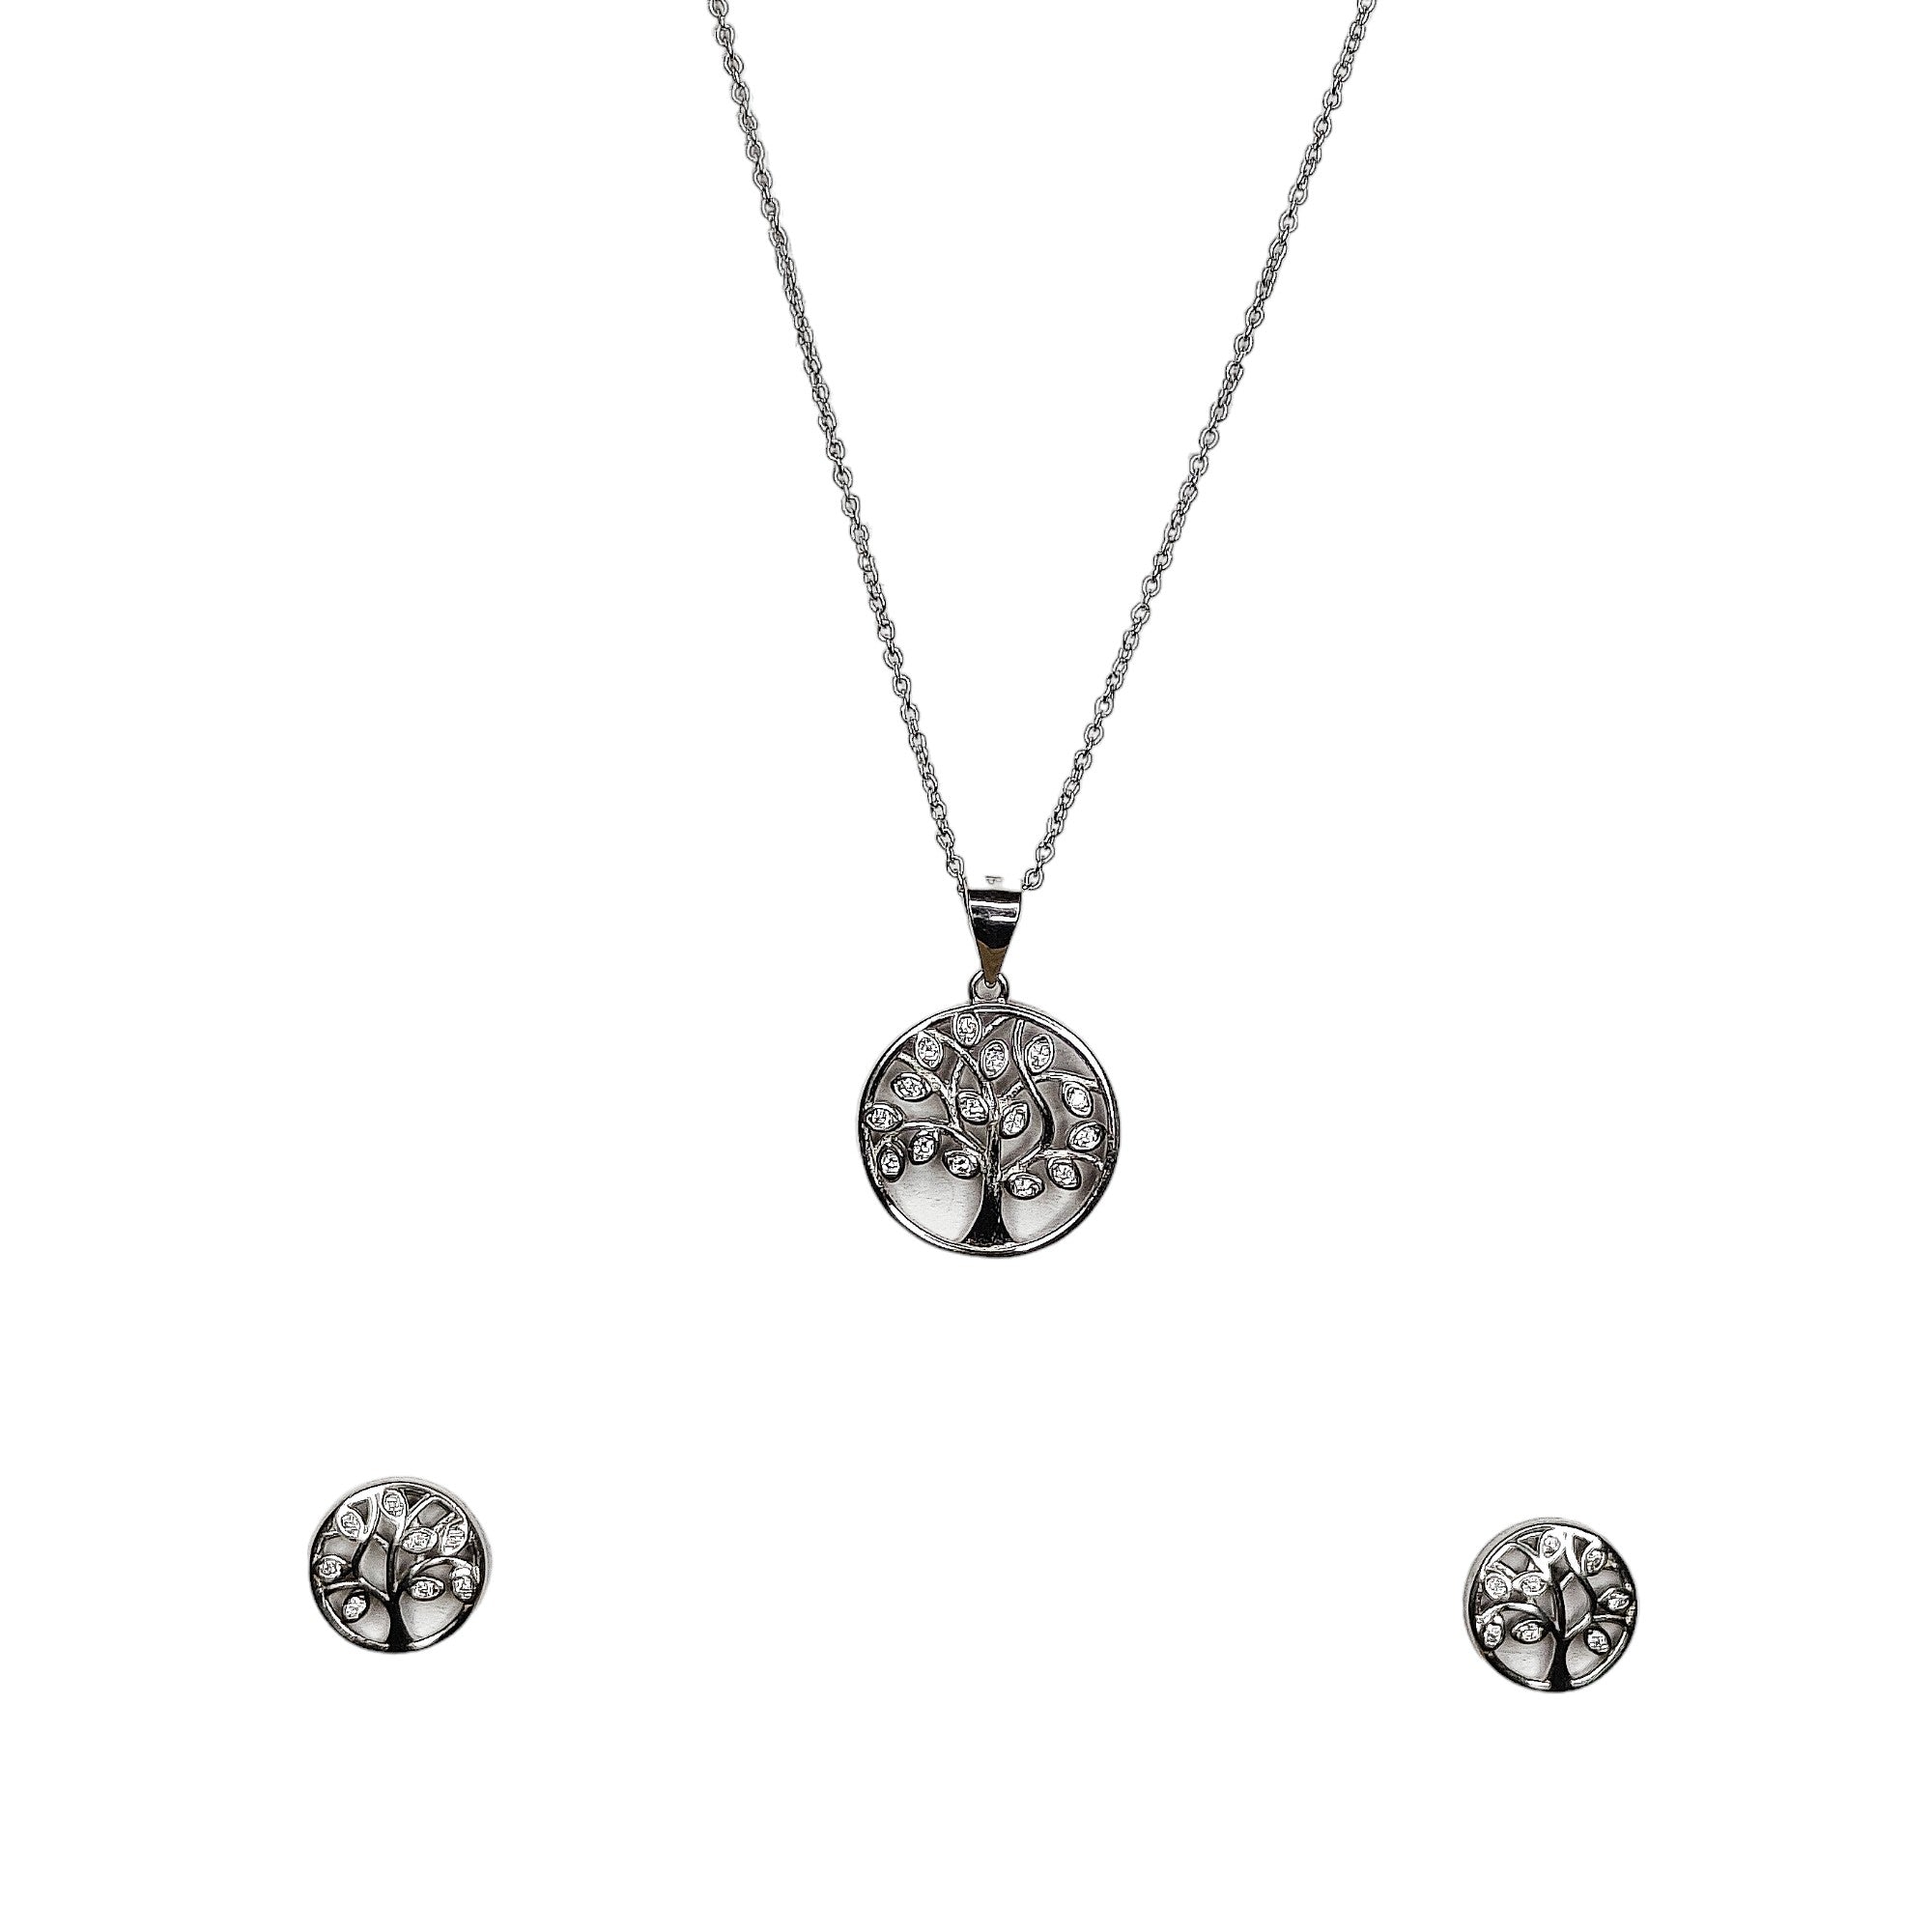 The Round Tree- Silver Pendent With Chain for Women - Rivansh